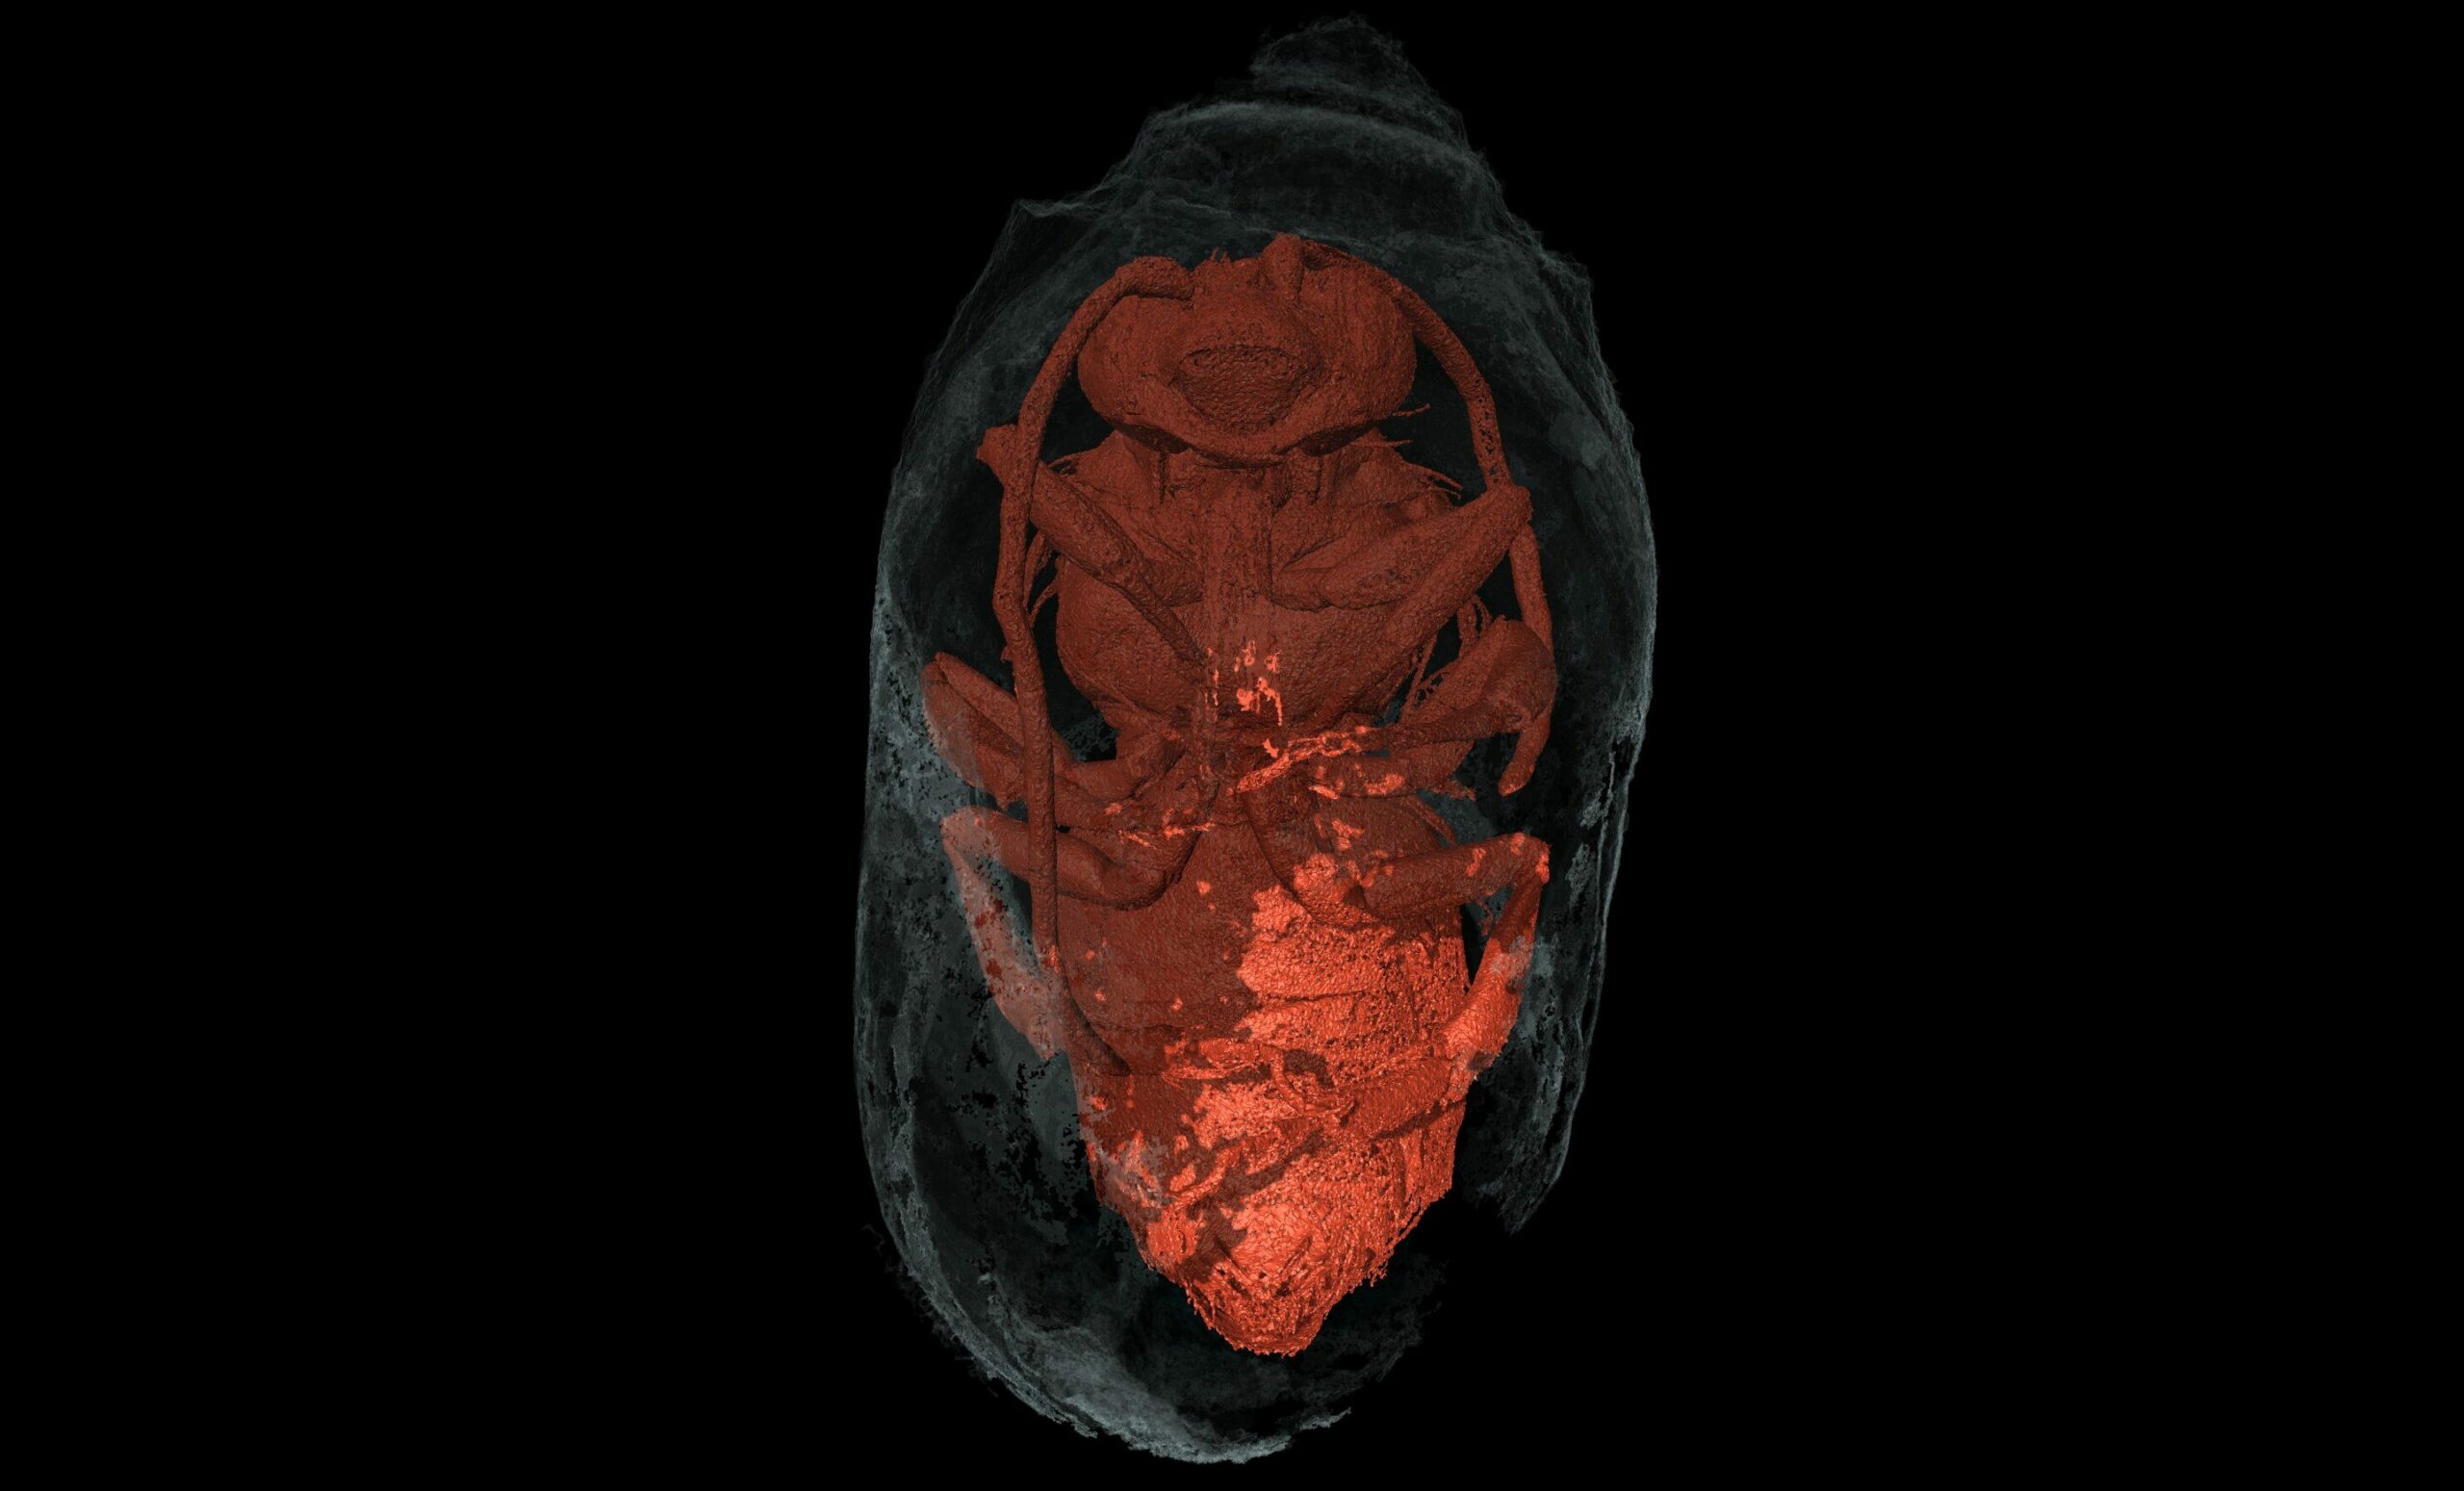 X-ray micro-computed tomography views of a male Eucera bee (ventral) inside a sealed cocoon. View obtained in the ICTP ElettramicroCT, Trieste's Elettra synchrotron radiation facility in Italy.The image shows the architecture of the excavated brood chamber closed by the spiral cap, containing an adult bee close to abandoning the cell.